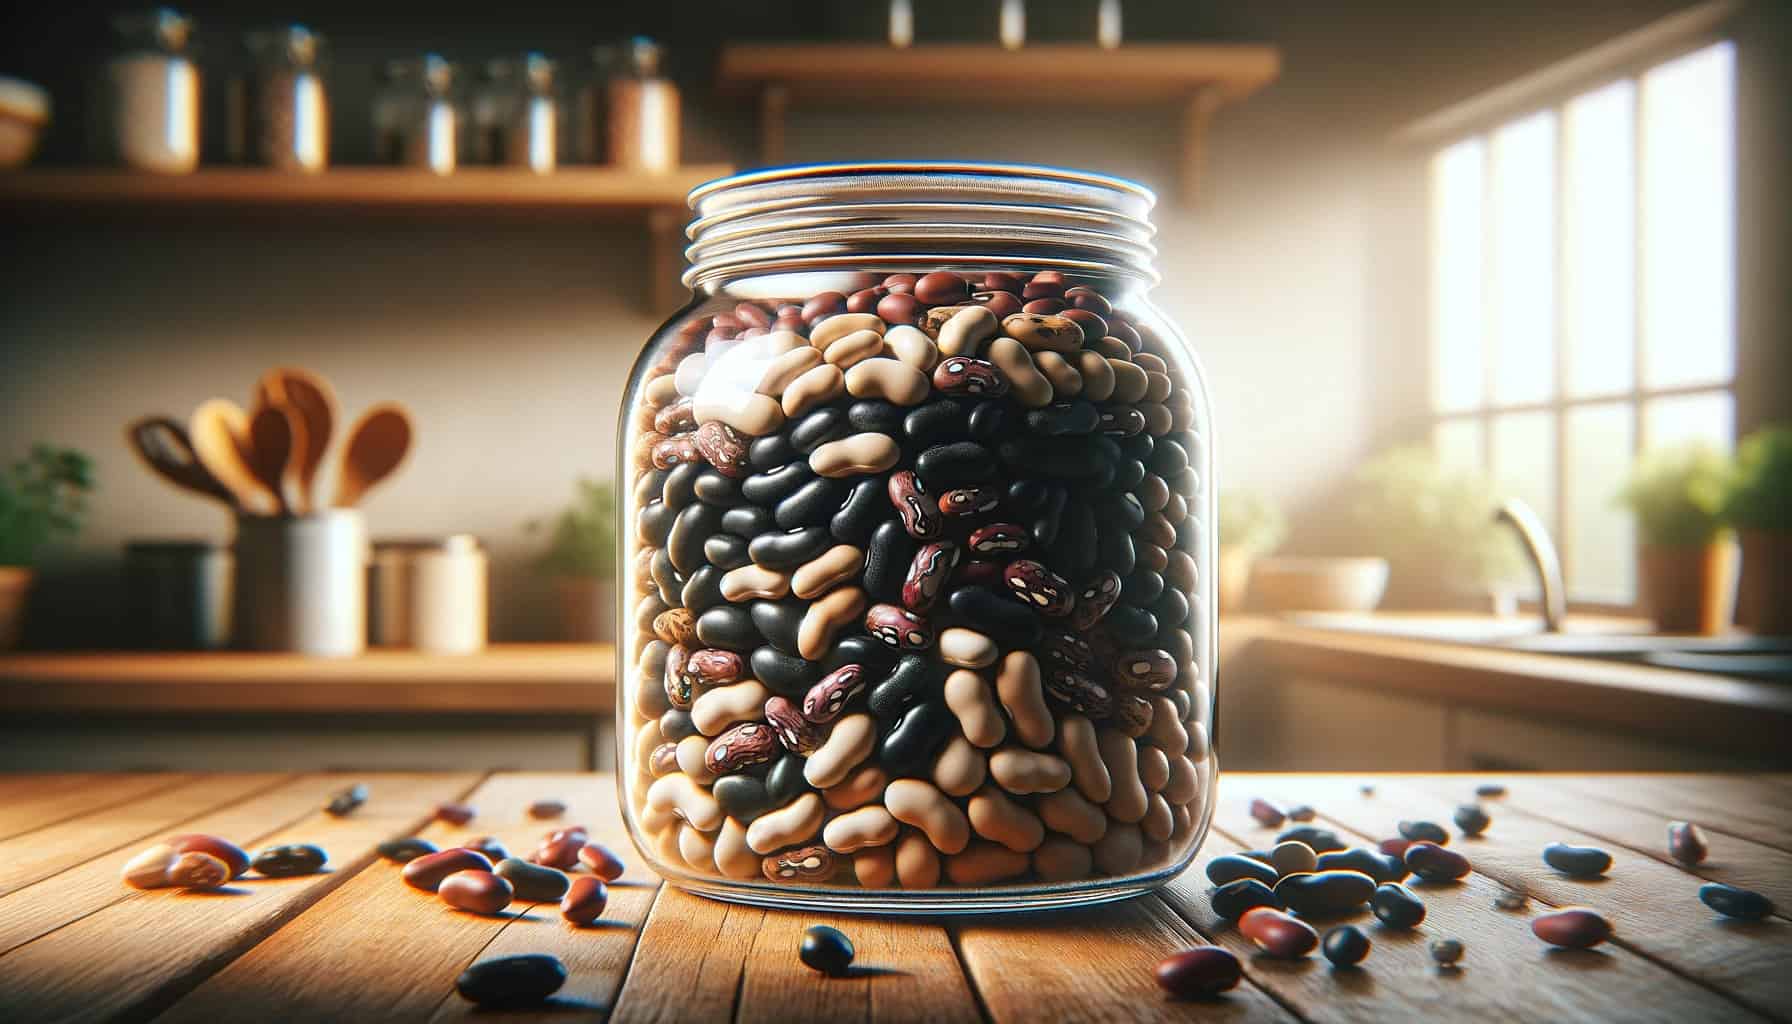 Dry beans in a glass jar